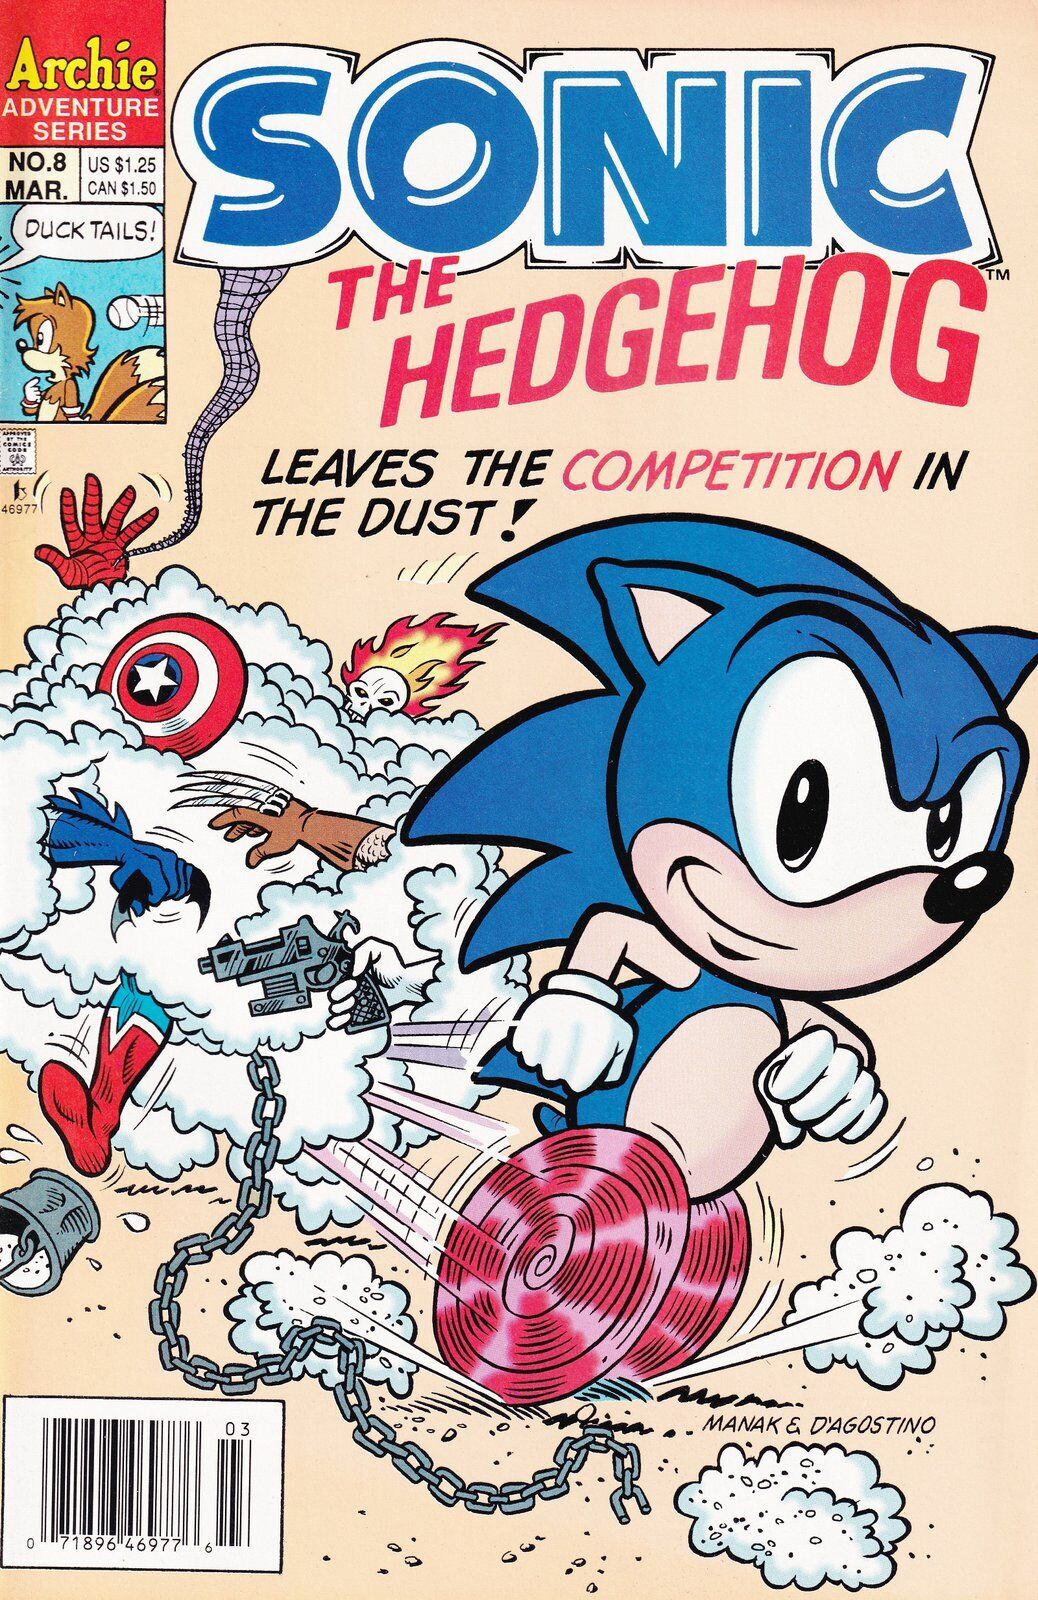 Sonic the Hedgehog #8 Newsstand Cover Archie Comics